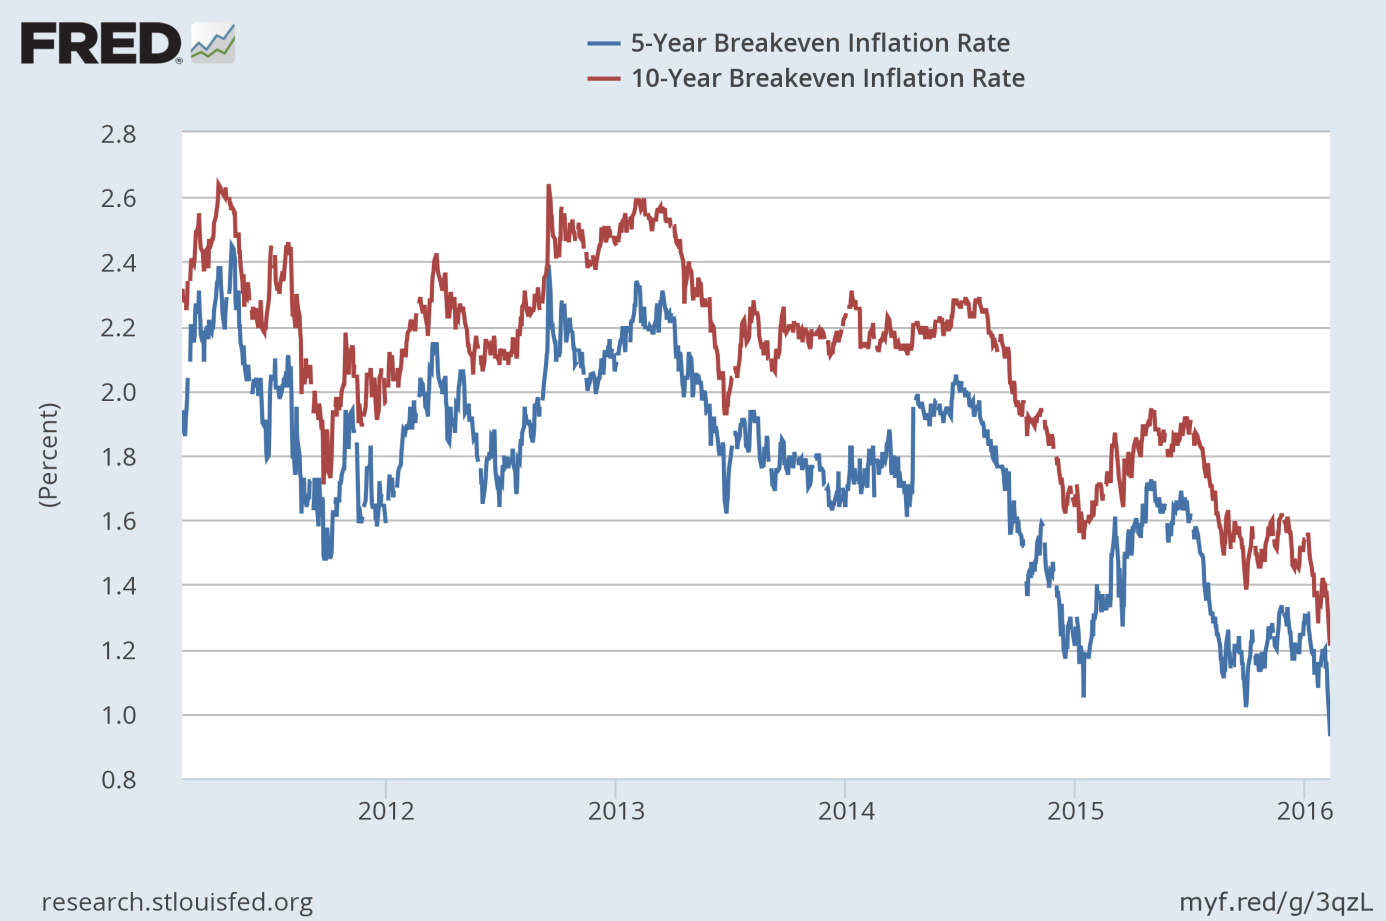 5-year breakeven inflation rate (blue line) and 10-year breakeven inflation rate (red line) from 2011 to 2016